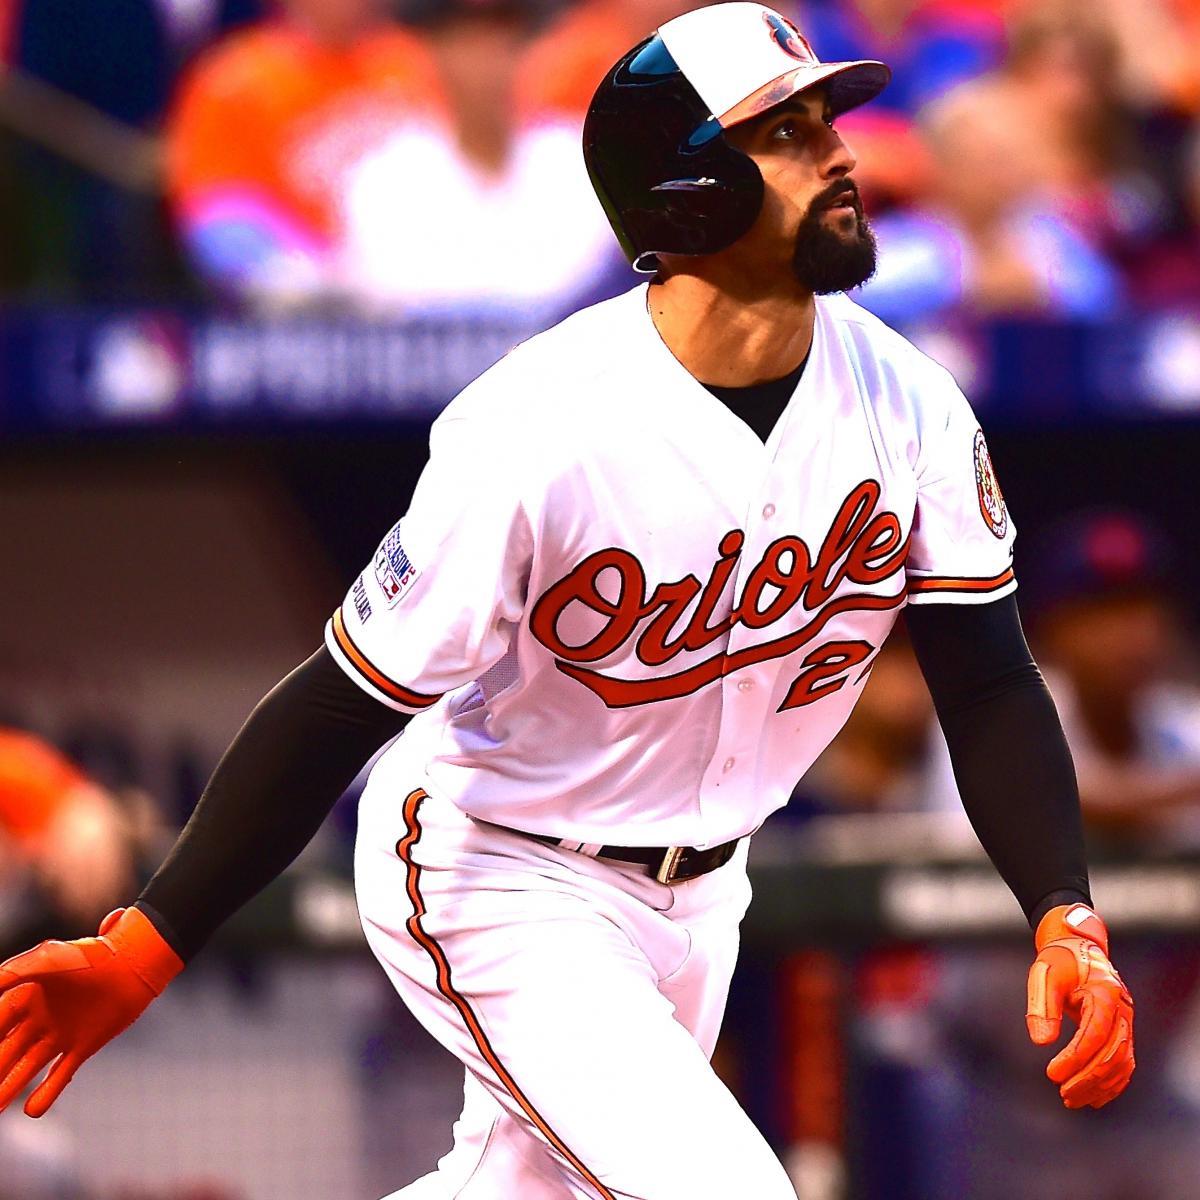 Orioles lose to Braves late, 6-5, as Nick Markakis goes 2-for-3 vs. old club